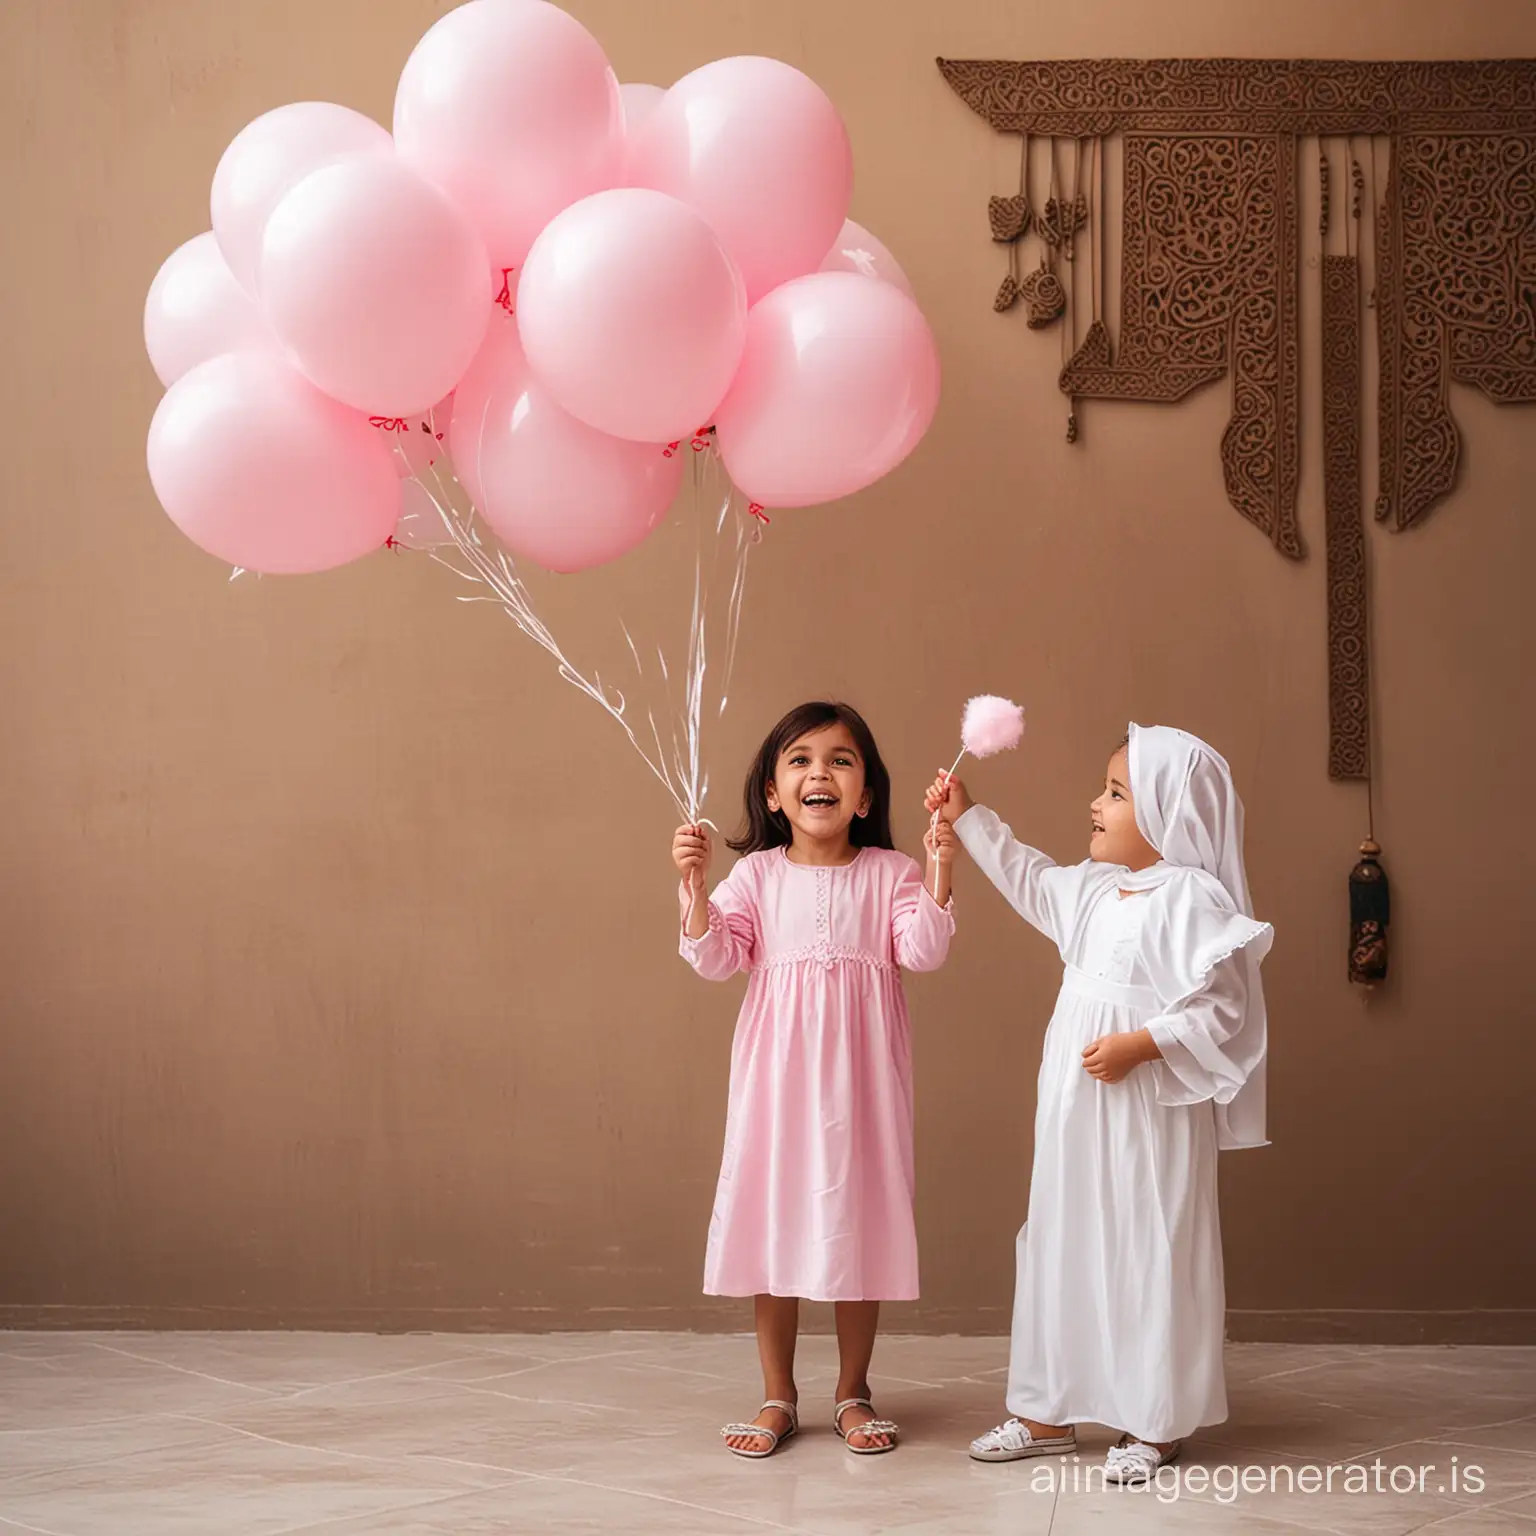 Little Arab children holding balloons and children eating cotton candy and having fun for Eid